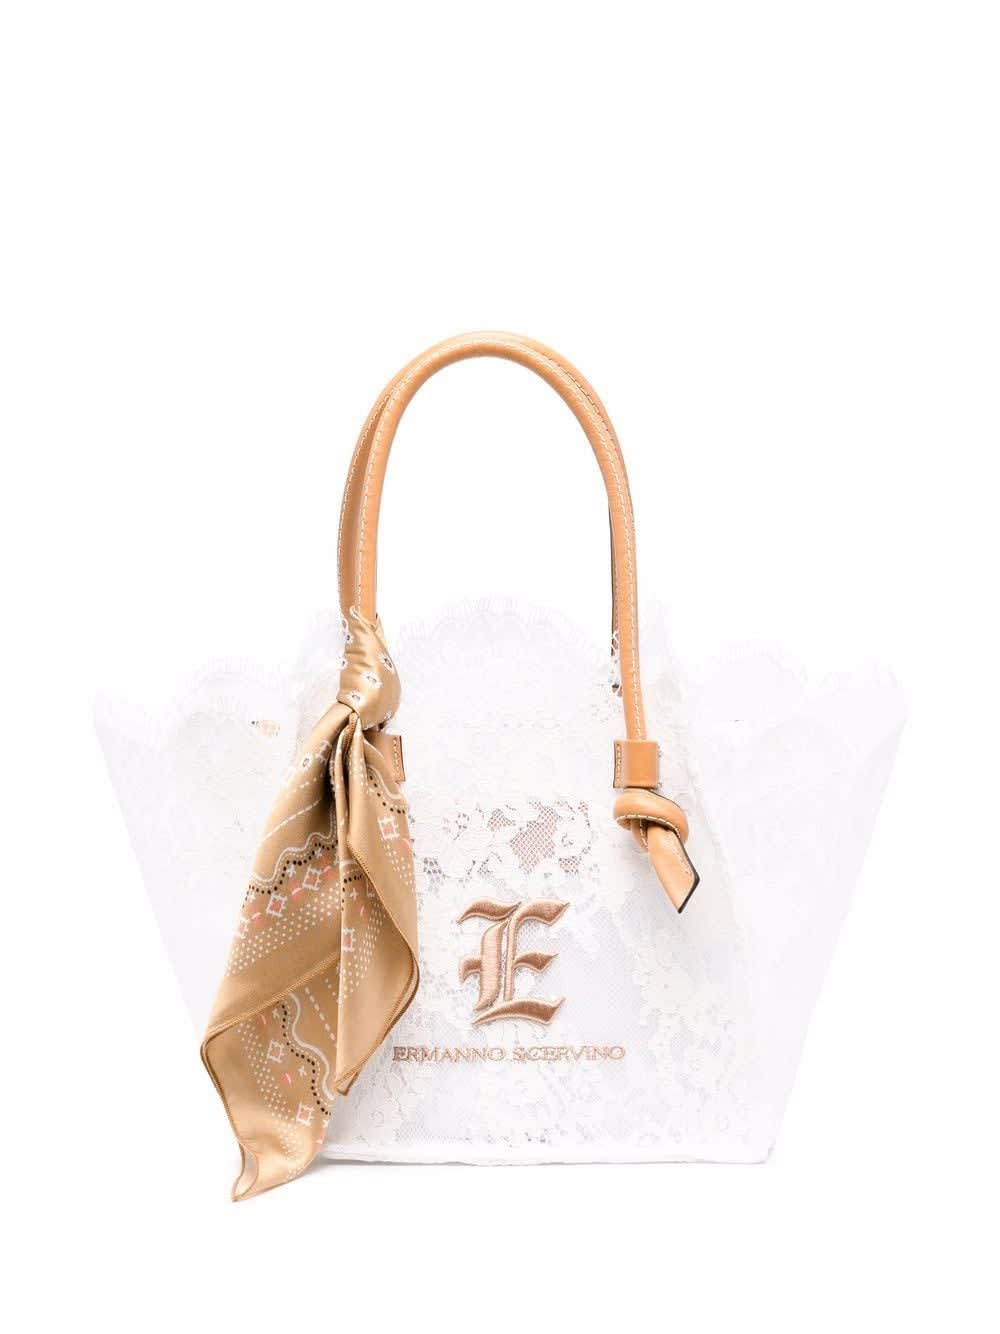 Ermanno Scervino White Lovelace Small Shopper Bag With Brown Foulard